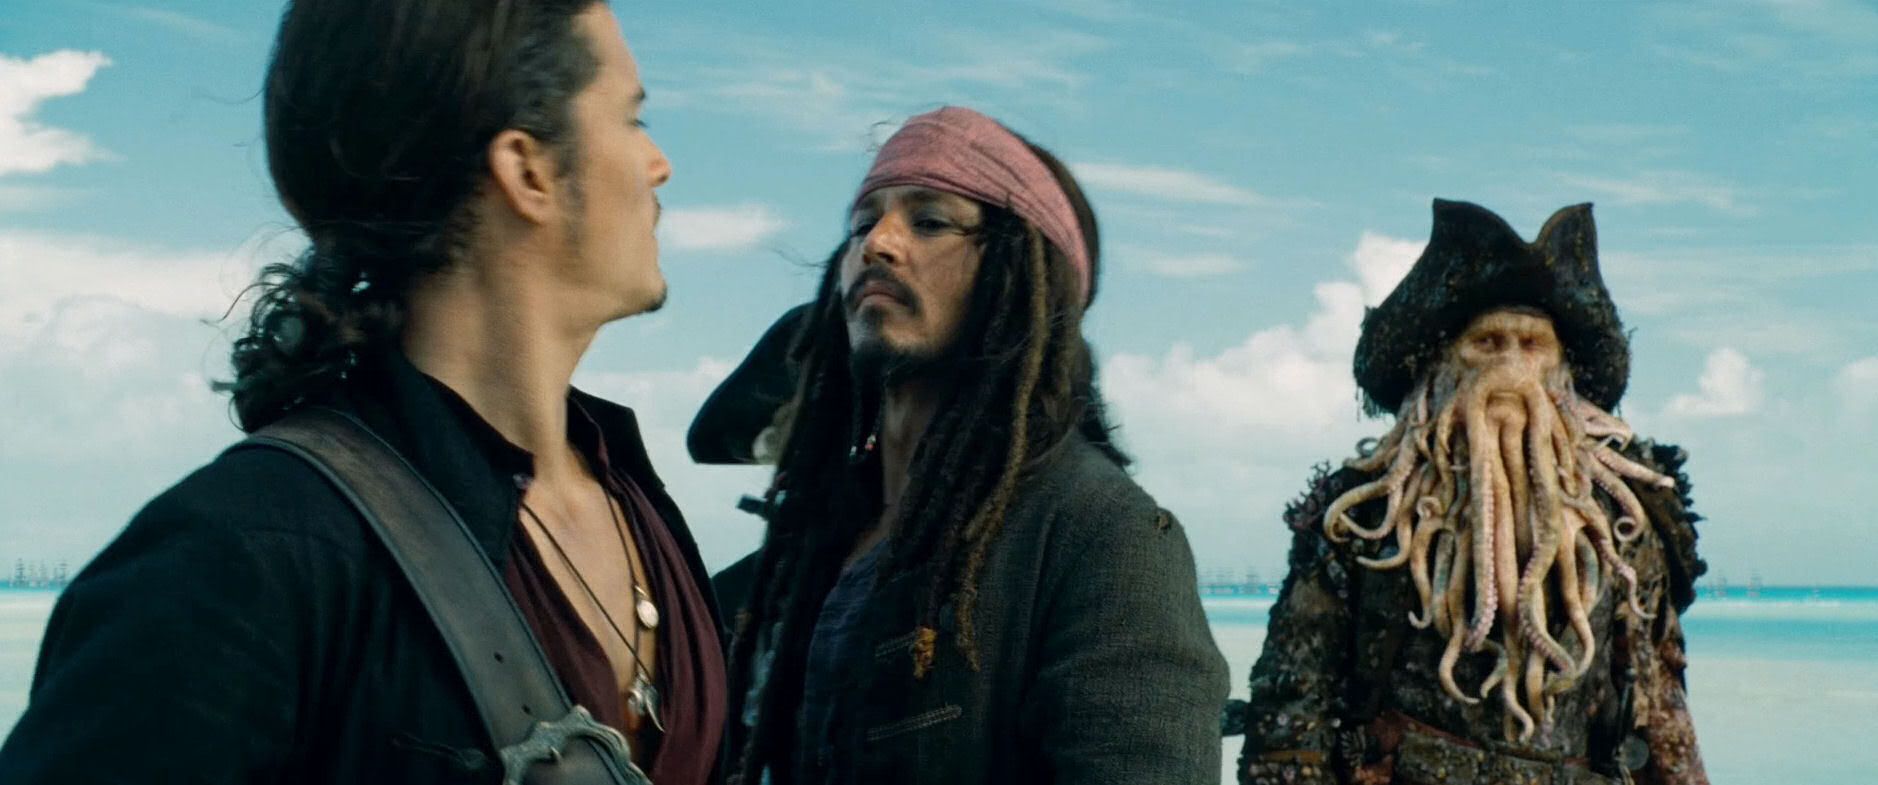 http://i4.photobucket.com/albums/y144/deepintodepp/Pirates%20At%20Worlds%20End/ScreenCaps%20from%20Clips/000001906.jpg